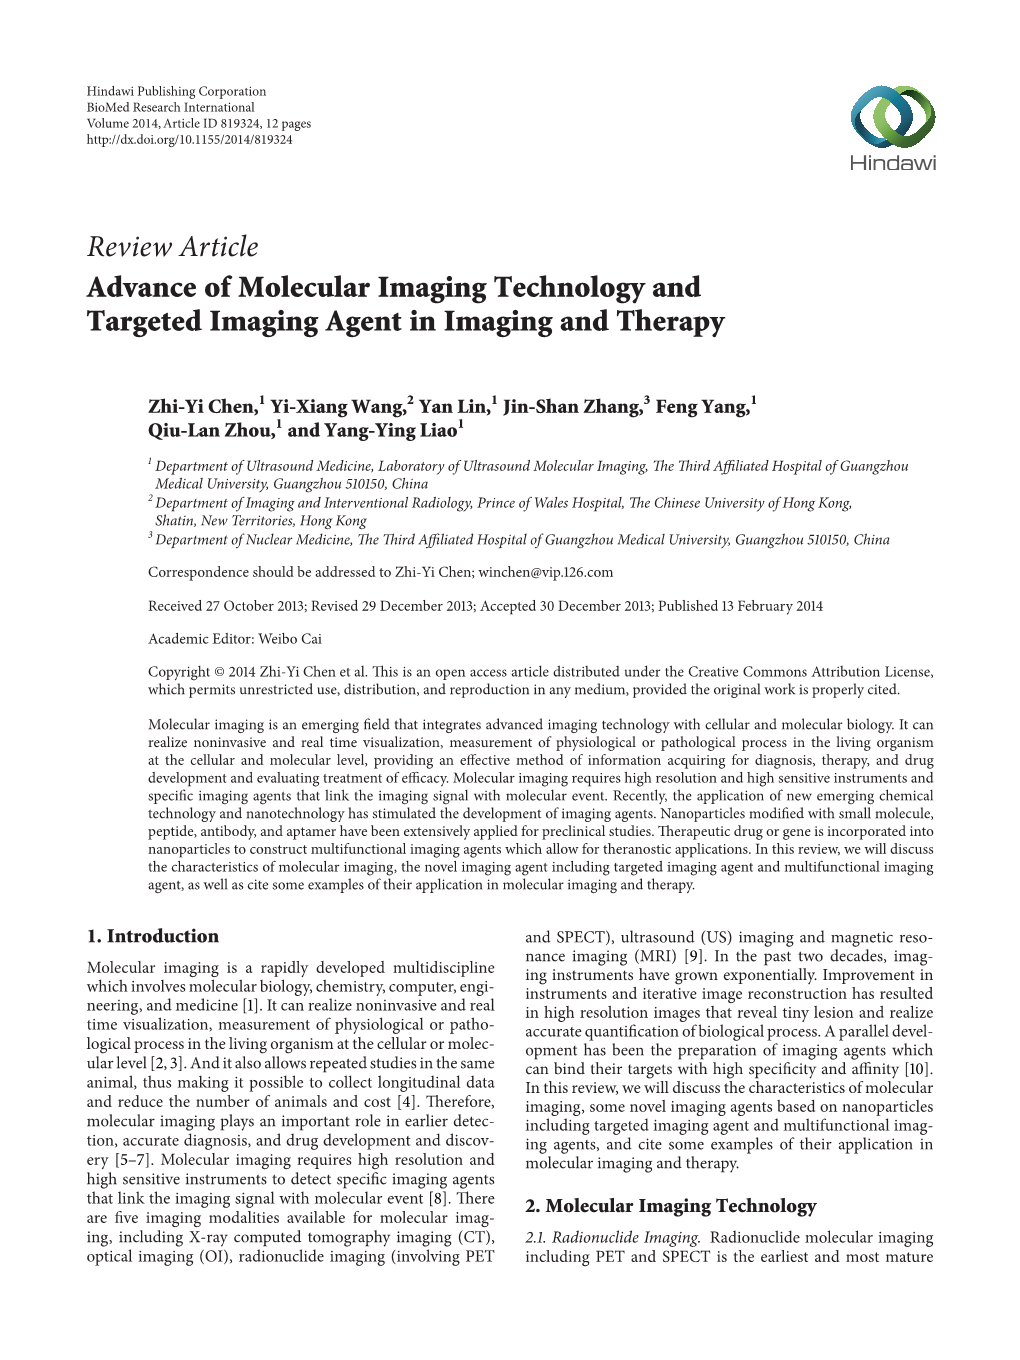 Review Article Advance of Molecular Imaging Technology and Targeted Imaging Agent in Imaging and Therapy